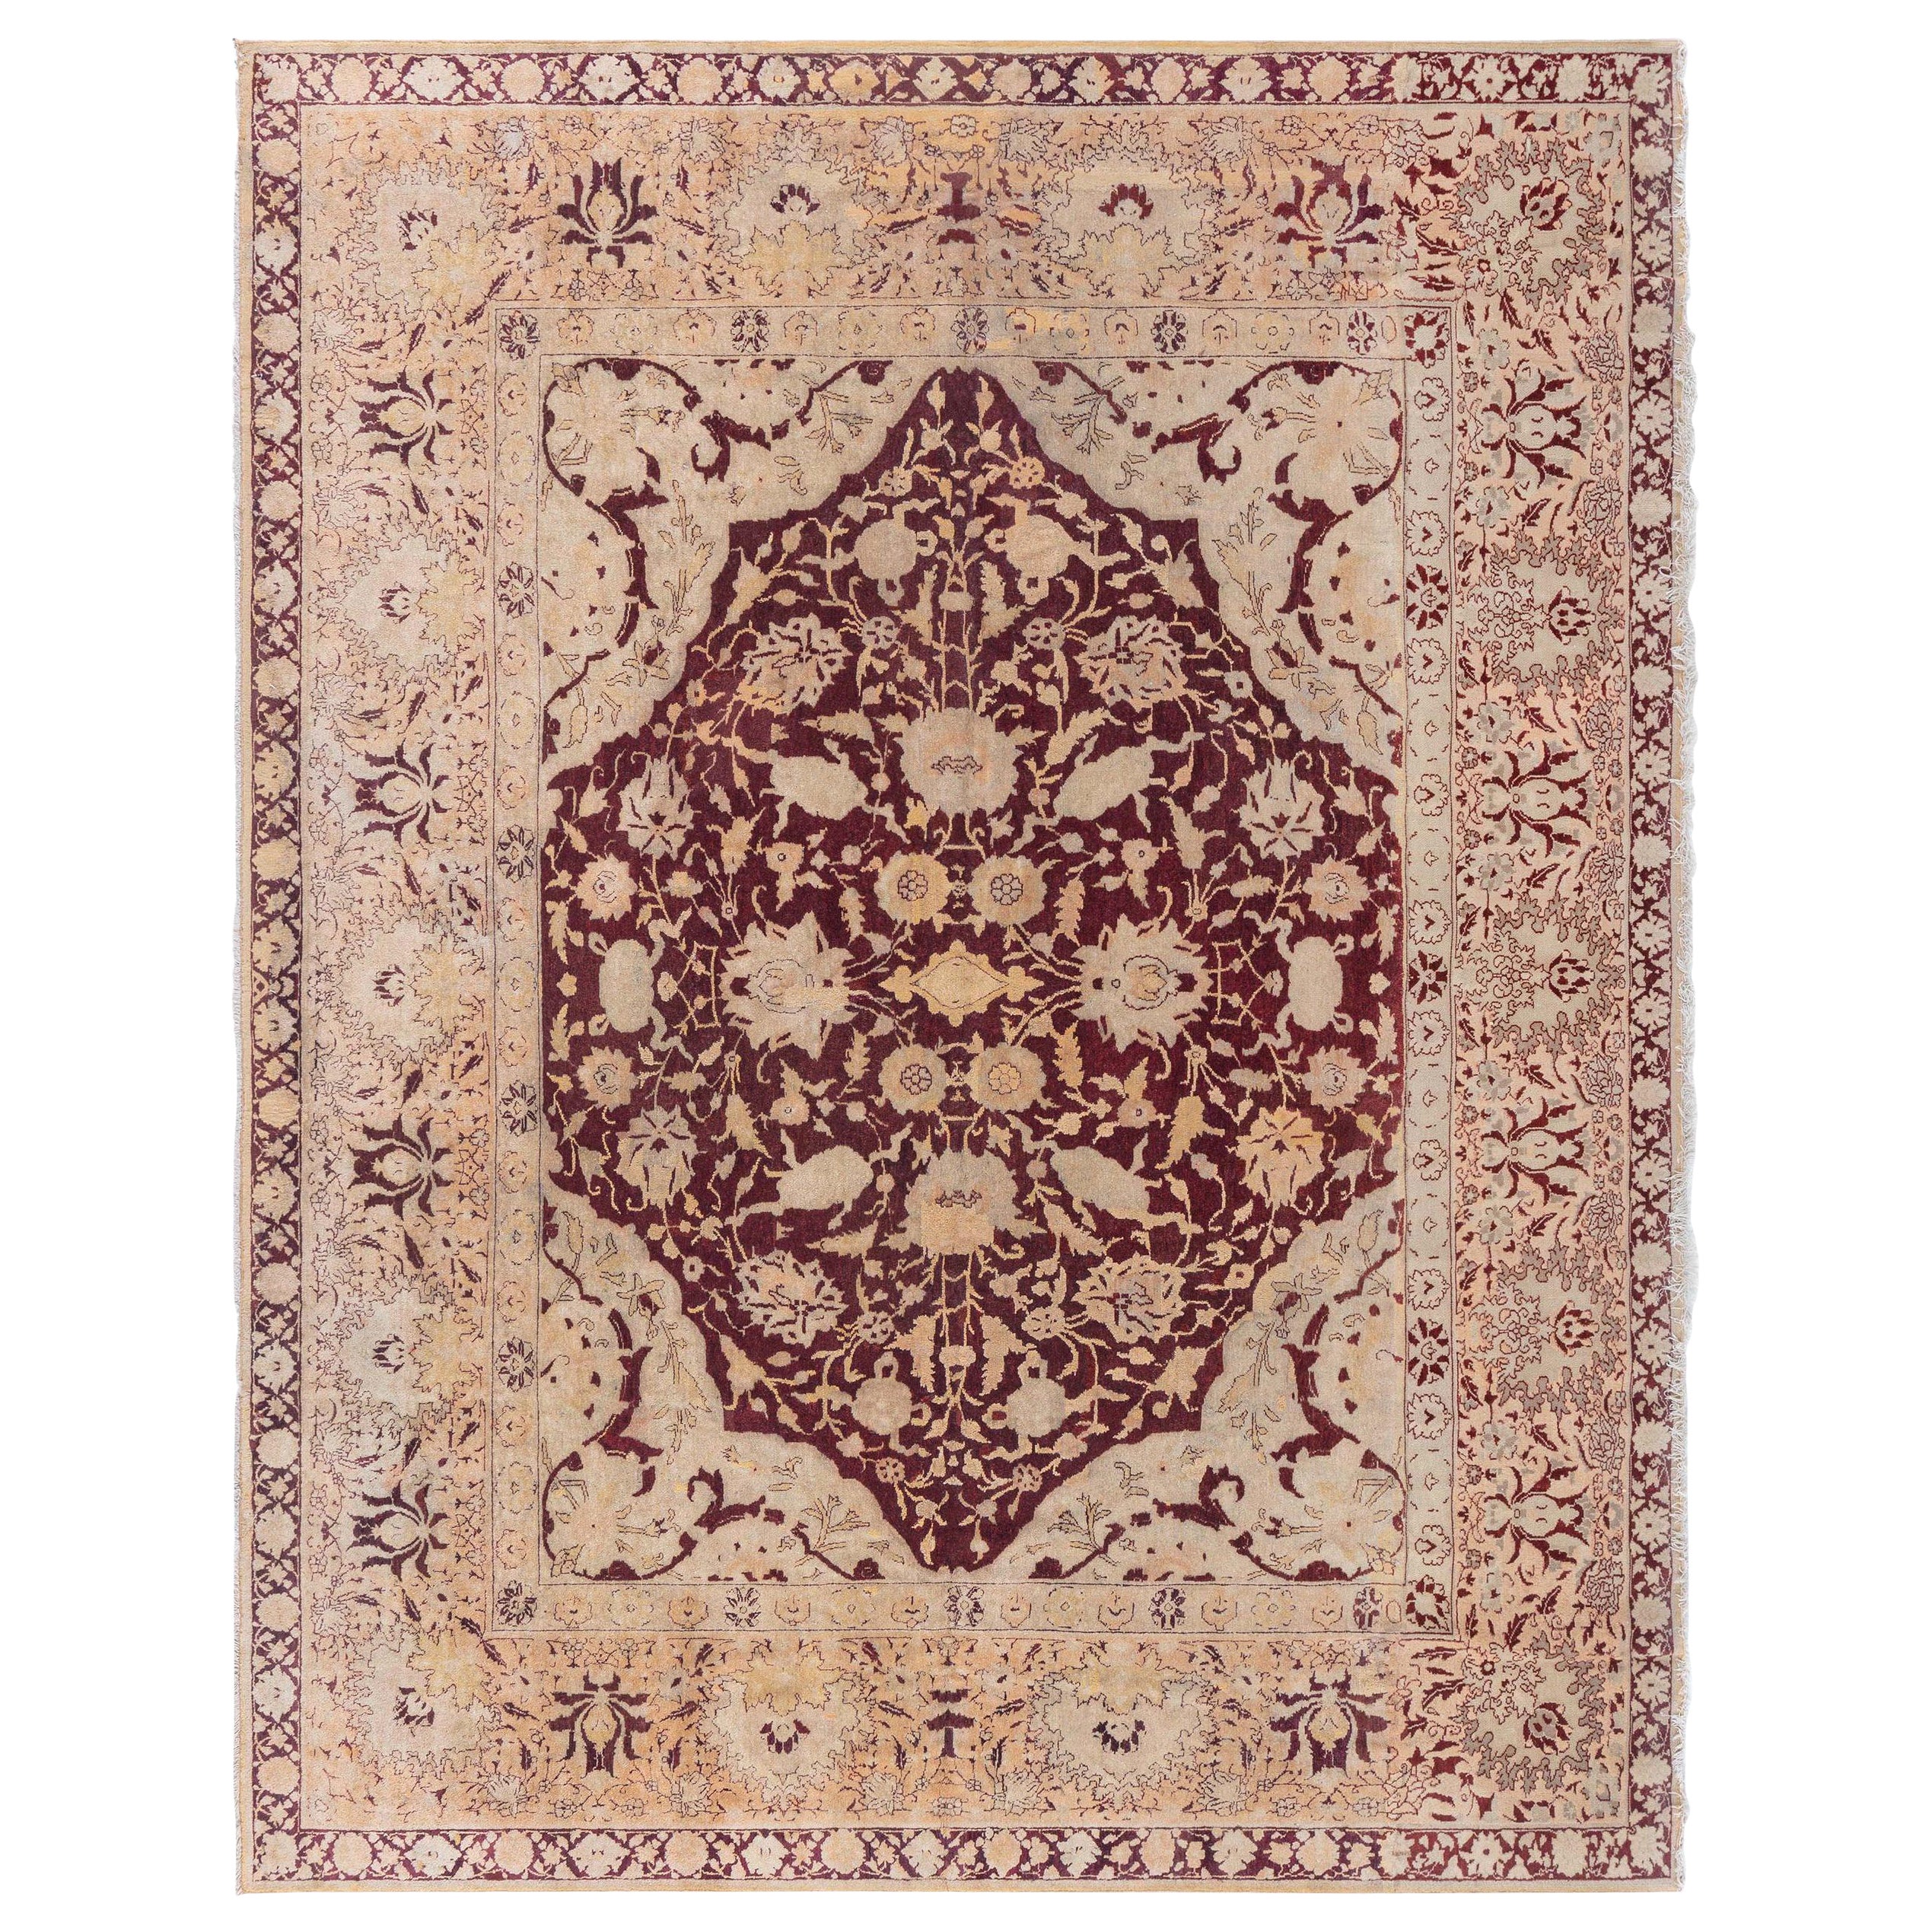 Antique Indian Amritsar Red and Beige Wool Carpet